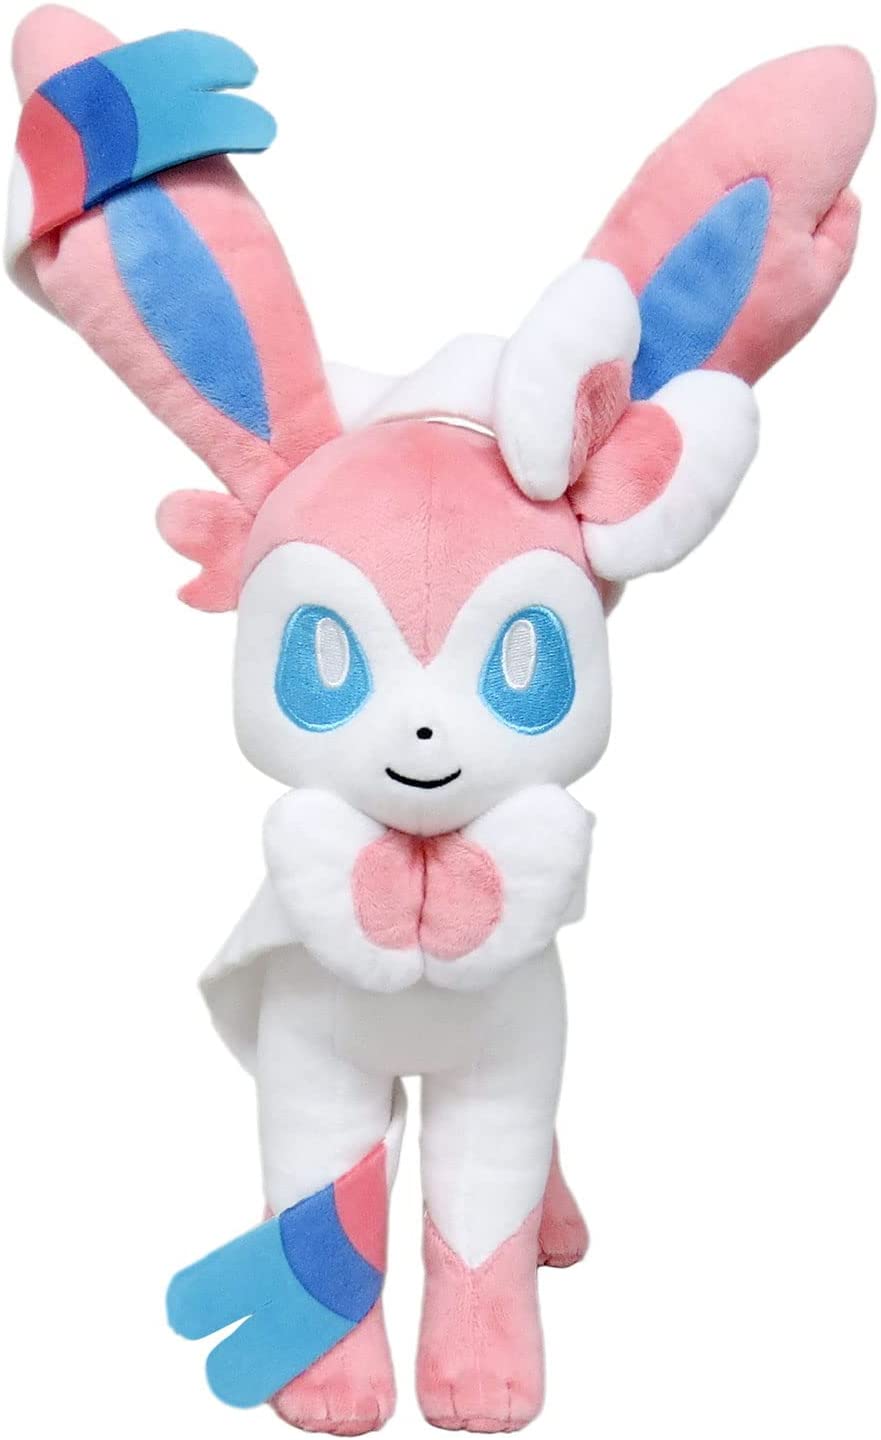 Sanei All Star Collection 12 Inch Plush - Sylveon (M) PP224